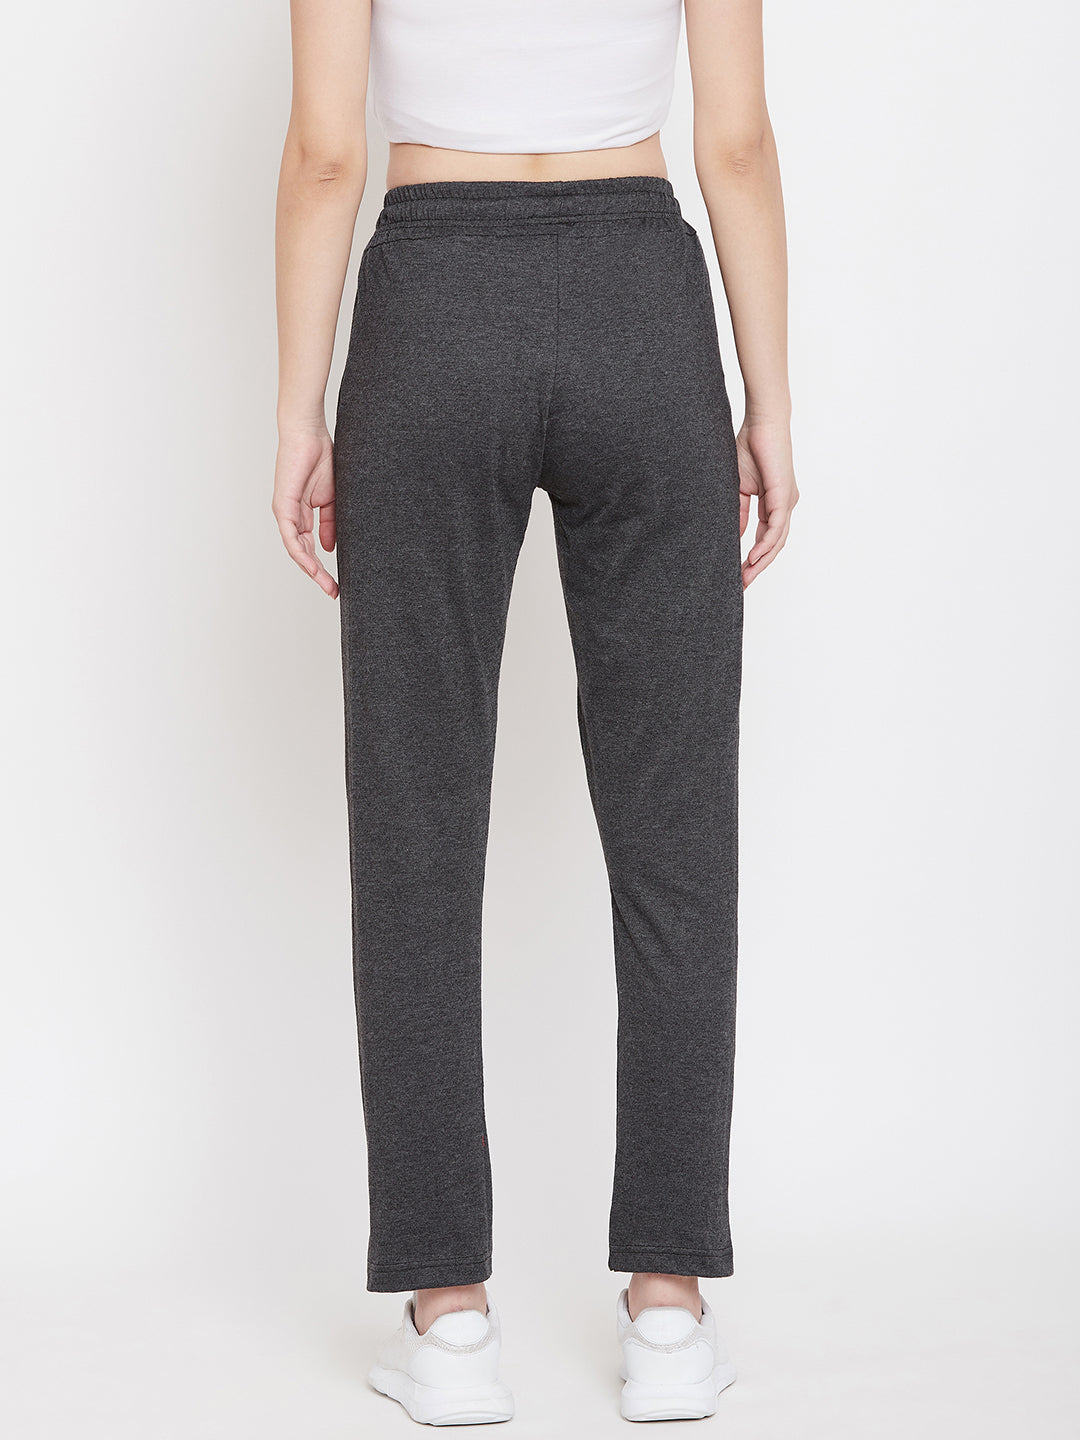 Women's Pack of 2 Track Pants-Navy and Dark Grey